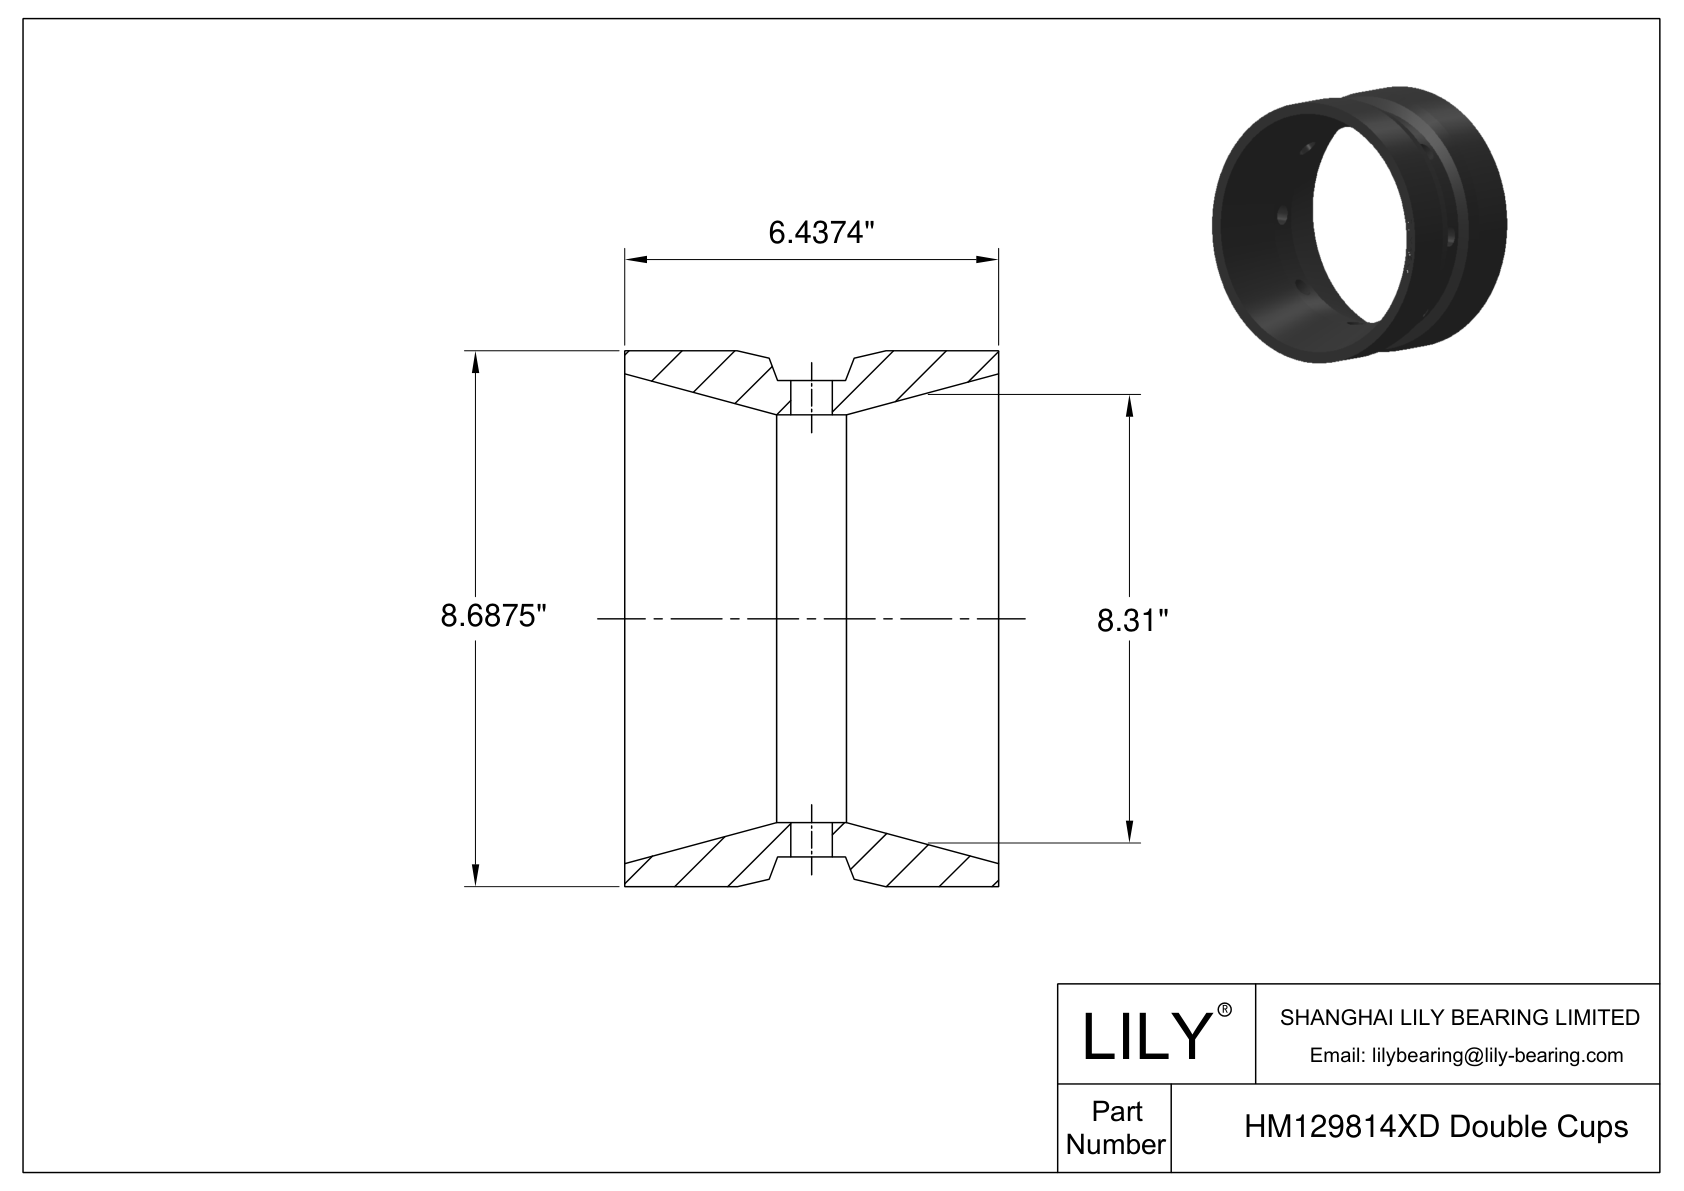 HM129814YD Double Cups (Imperial) cad drawing